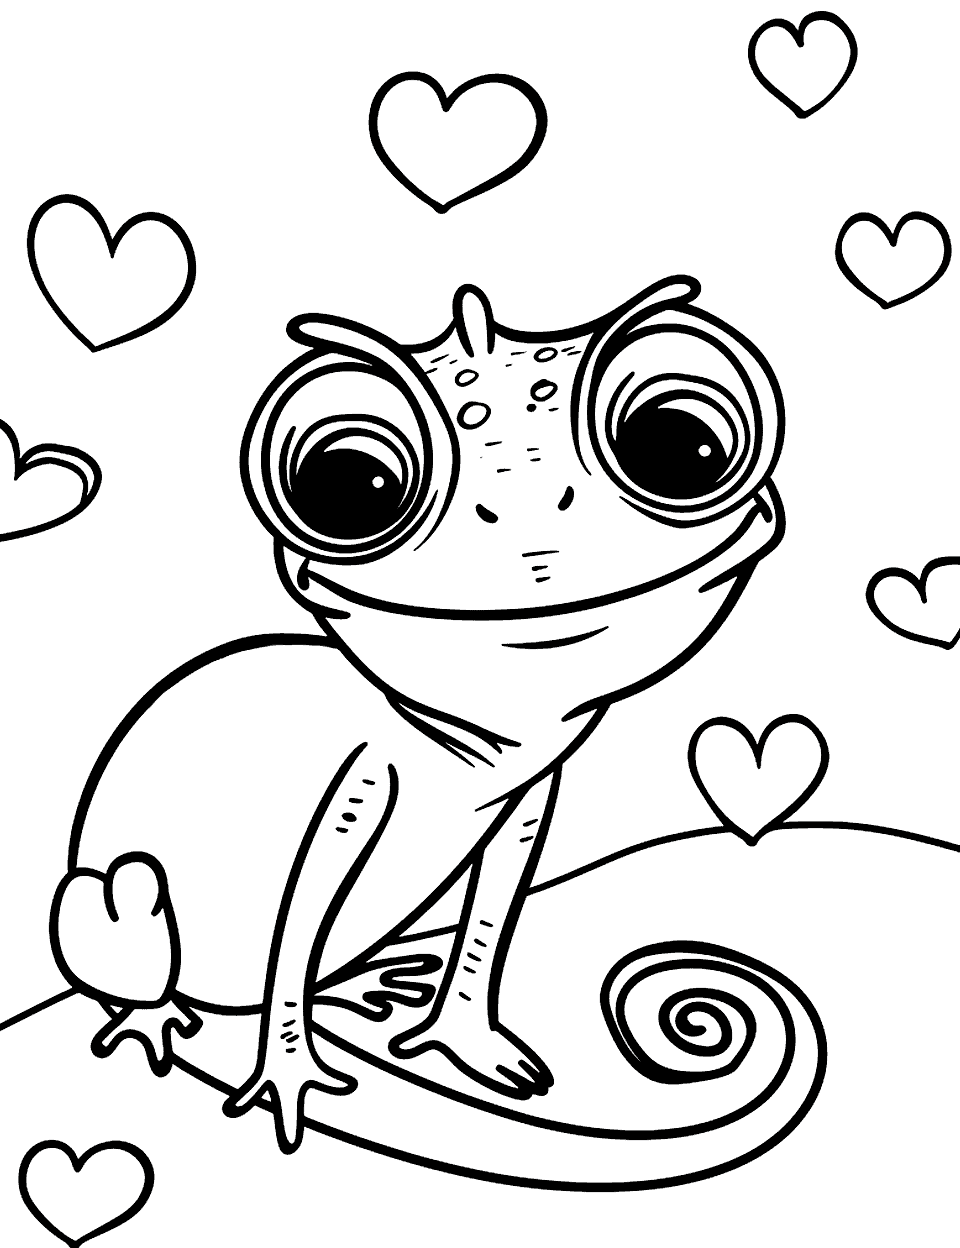 Kawaii Chameleon with Hearts Lizard Coloring Page - A cartoon-style chameleon surrounded by floating hearts, adding a kawaii charm.